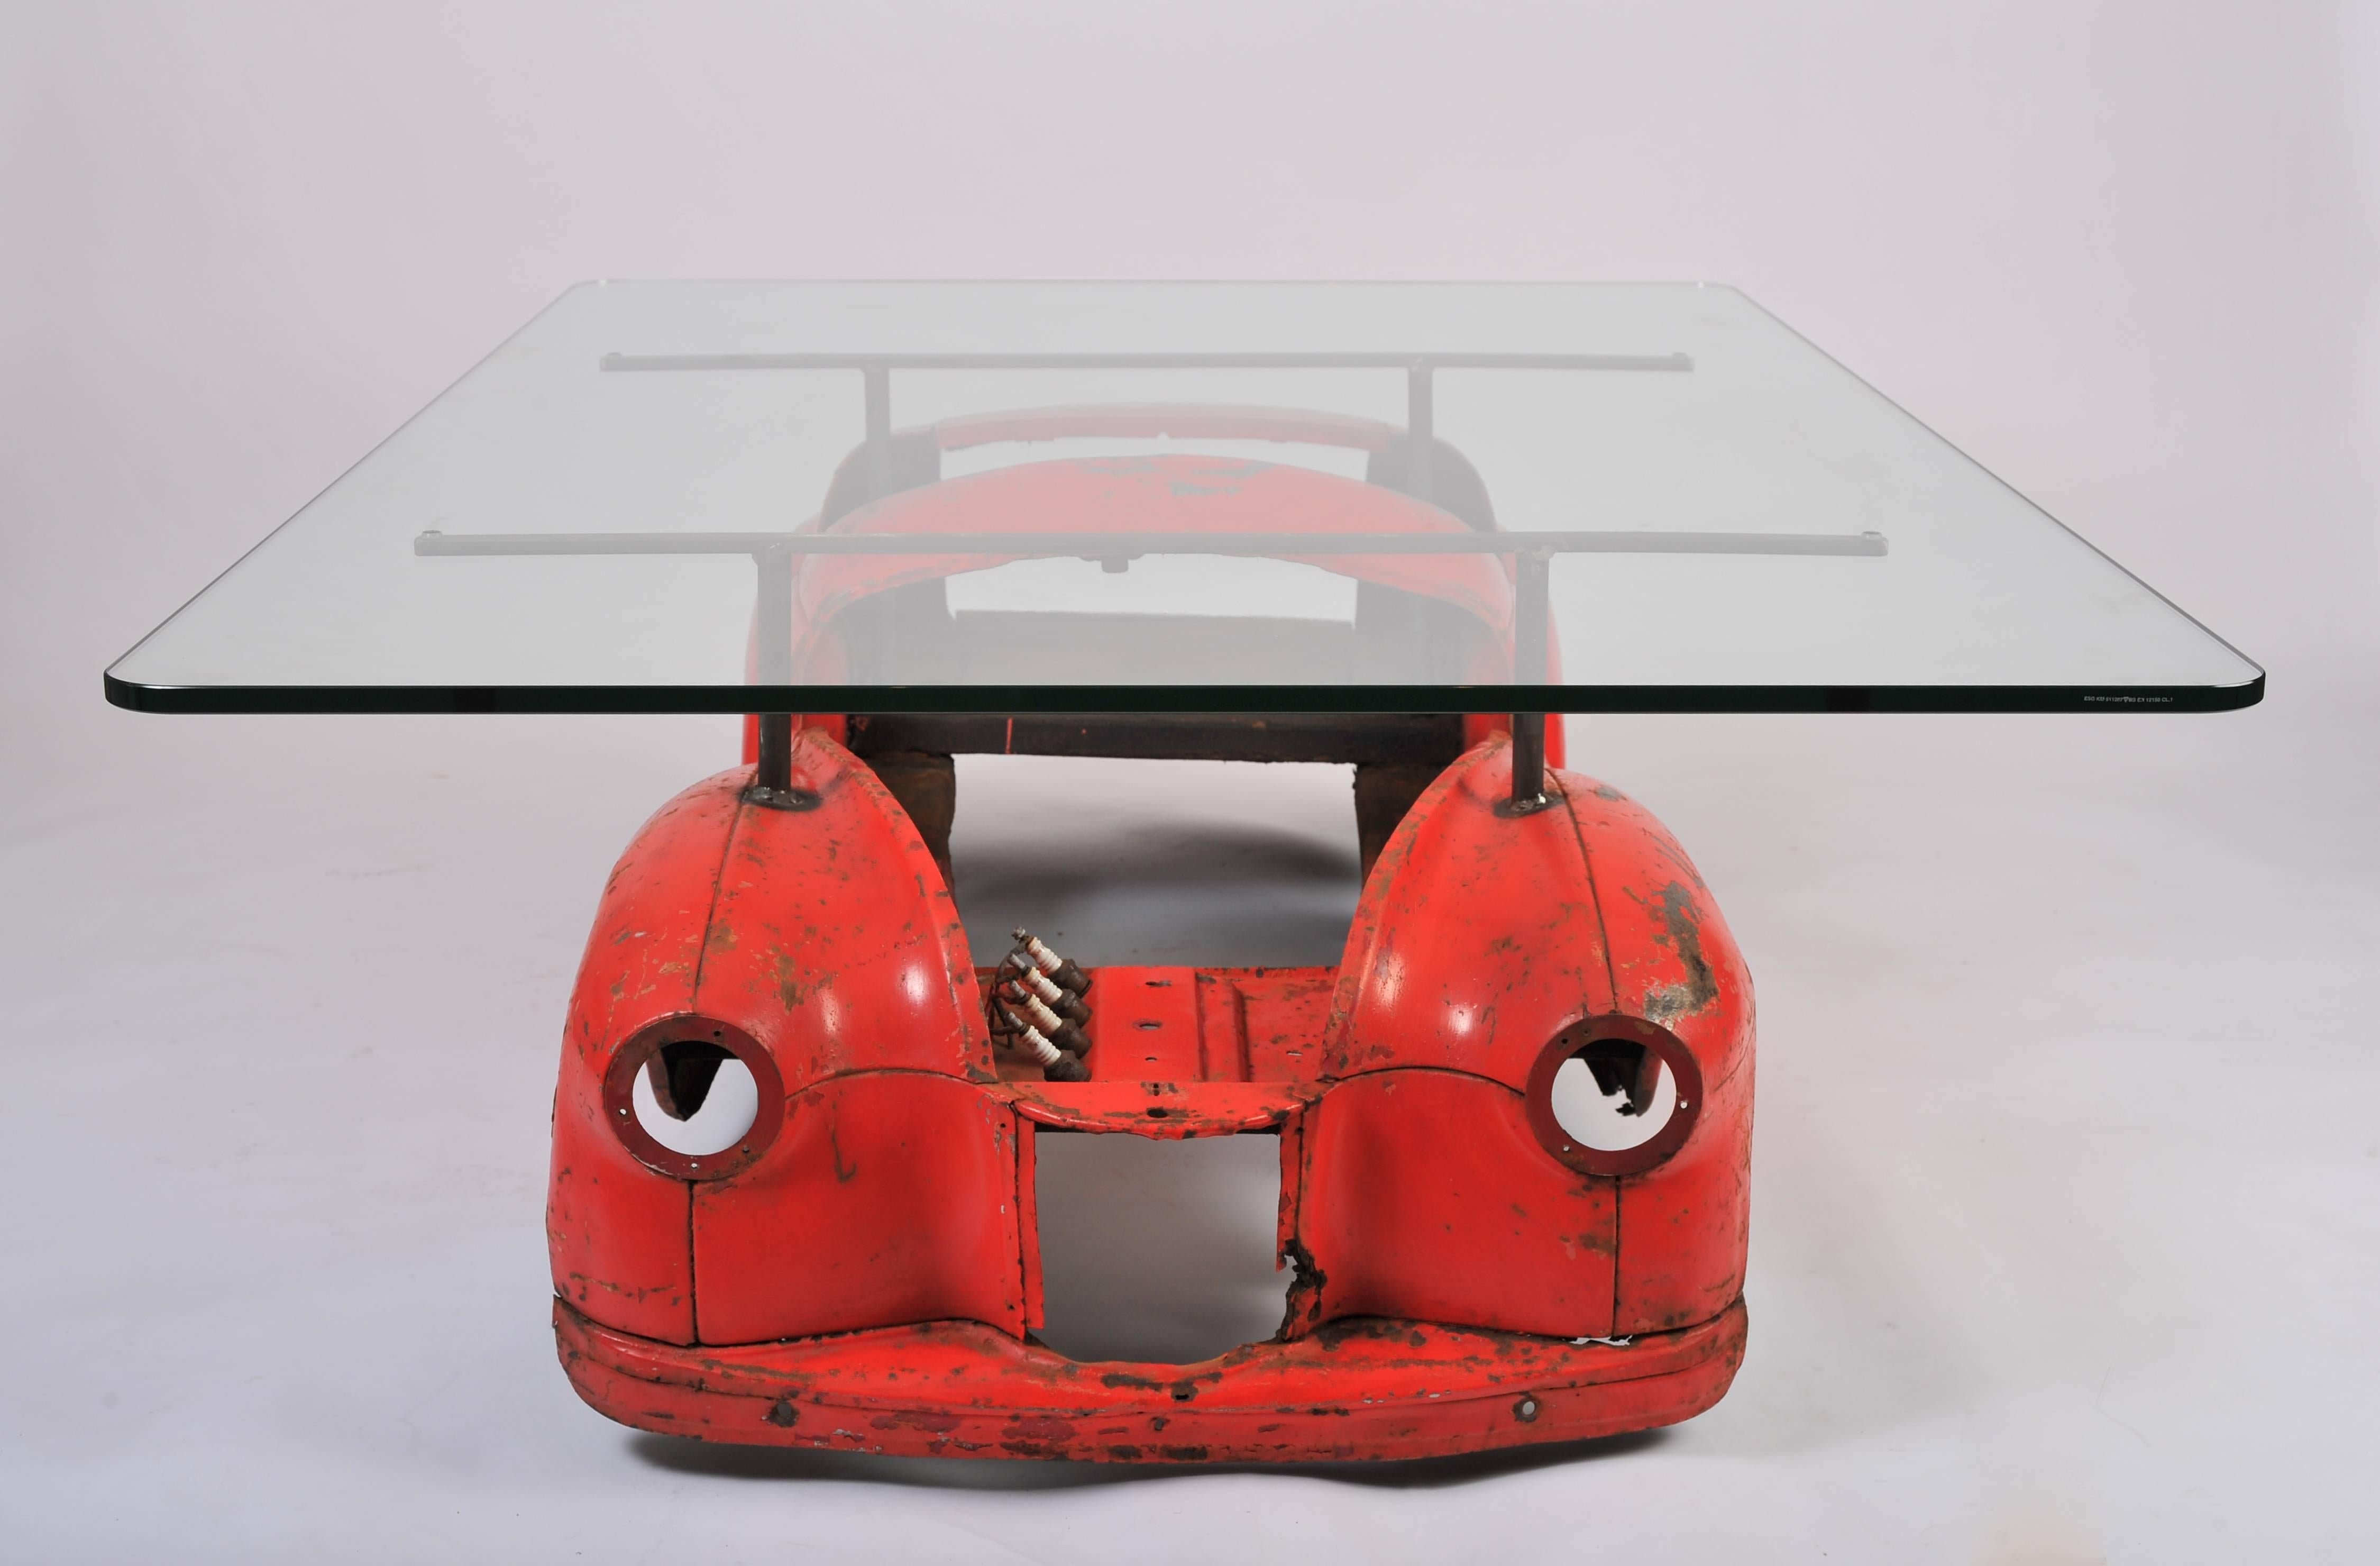 Contemporary 20th Century Industrial Coffee Table with Toy Car Design